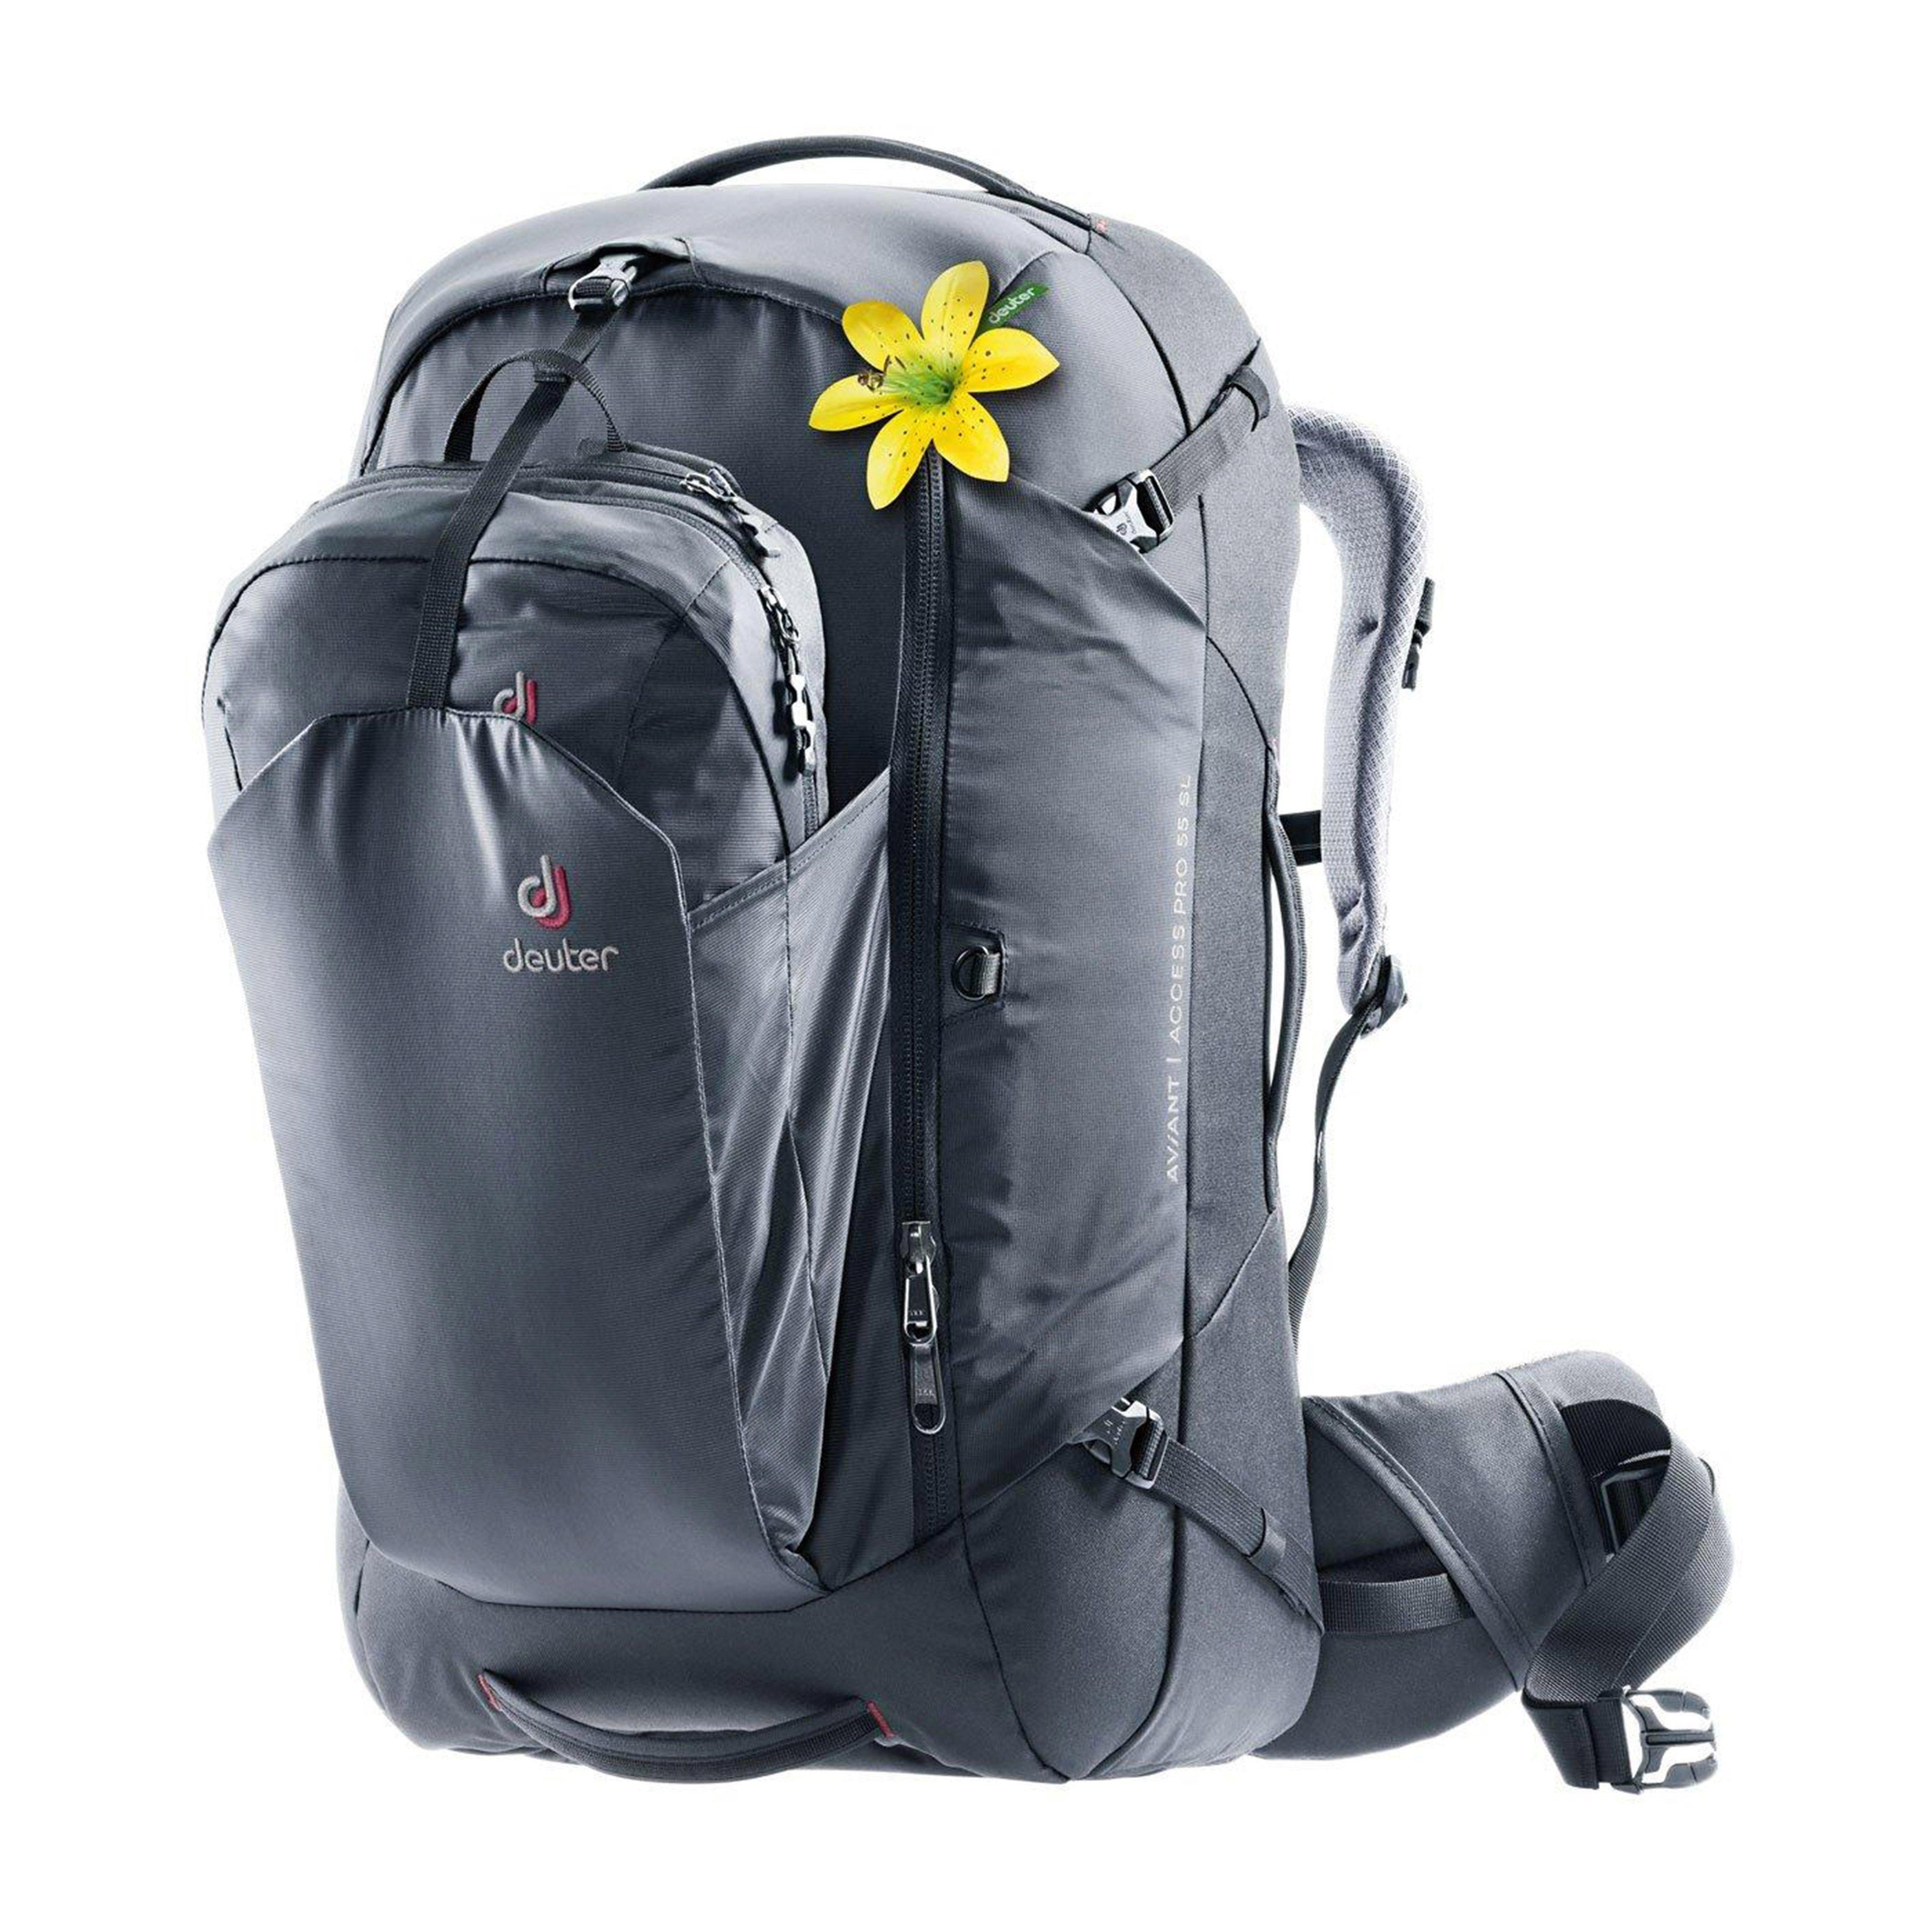 Deuter AViANT Access Pro 55 SL Travel Backpack Review